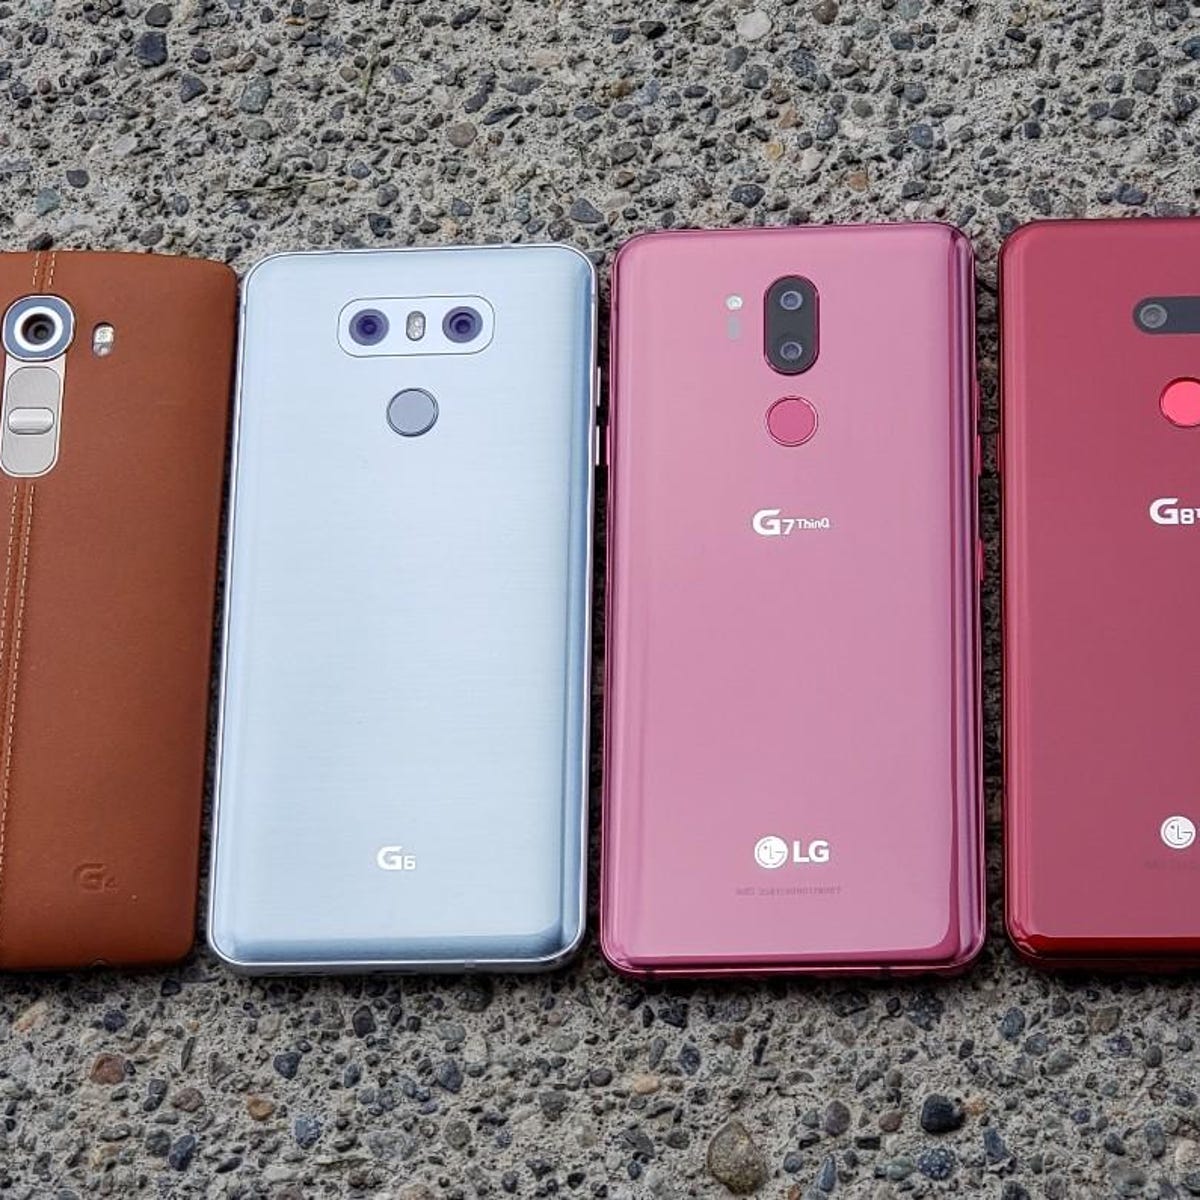 seven innovations brought to the smartphone world by lg | zdnet